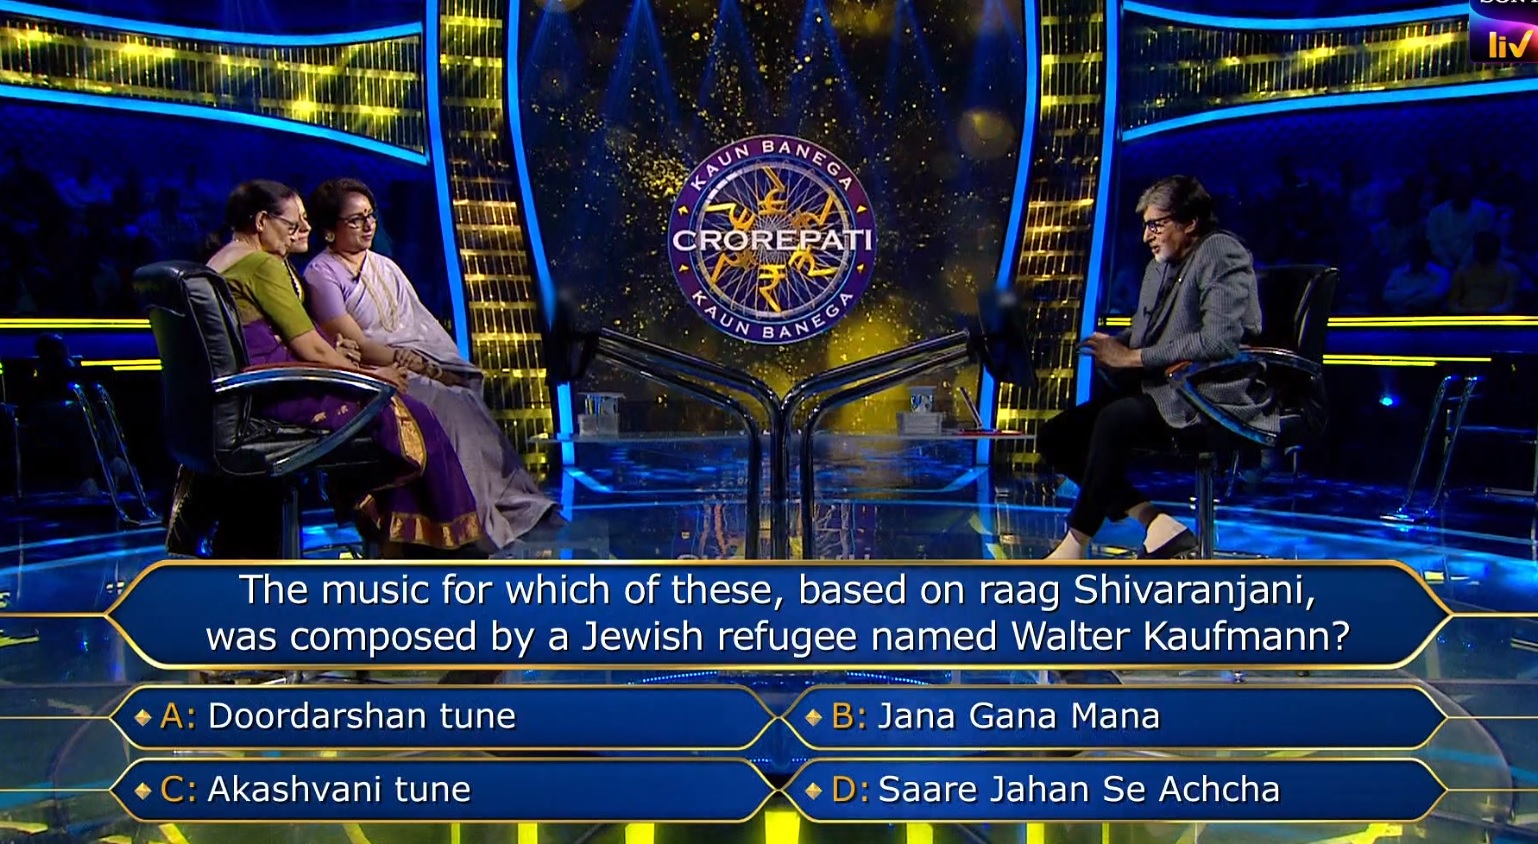 Ques : The music for which of these, based on raag Shivaranjani was composed by a Jewish refugee named Walter Kaufmann?